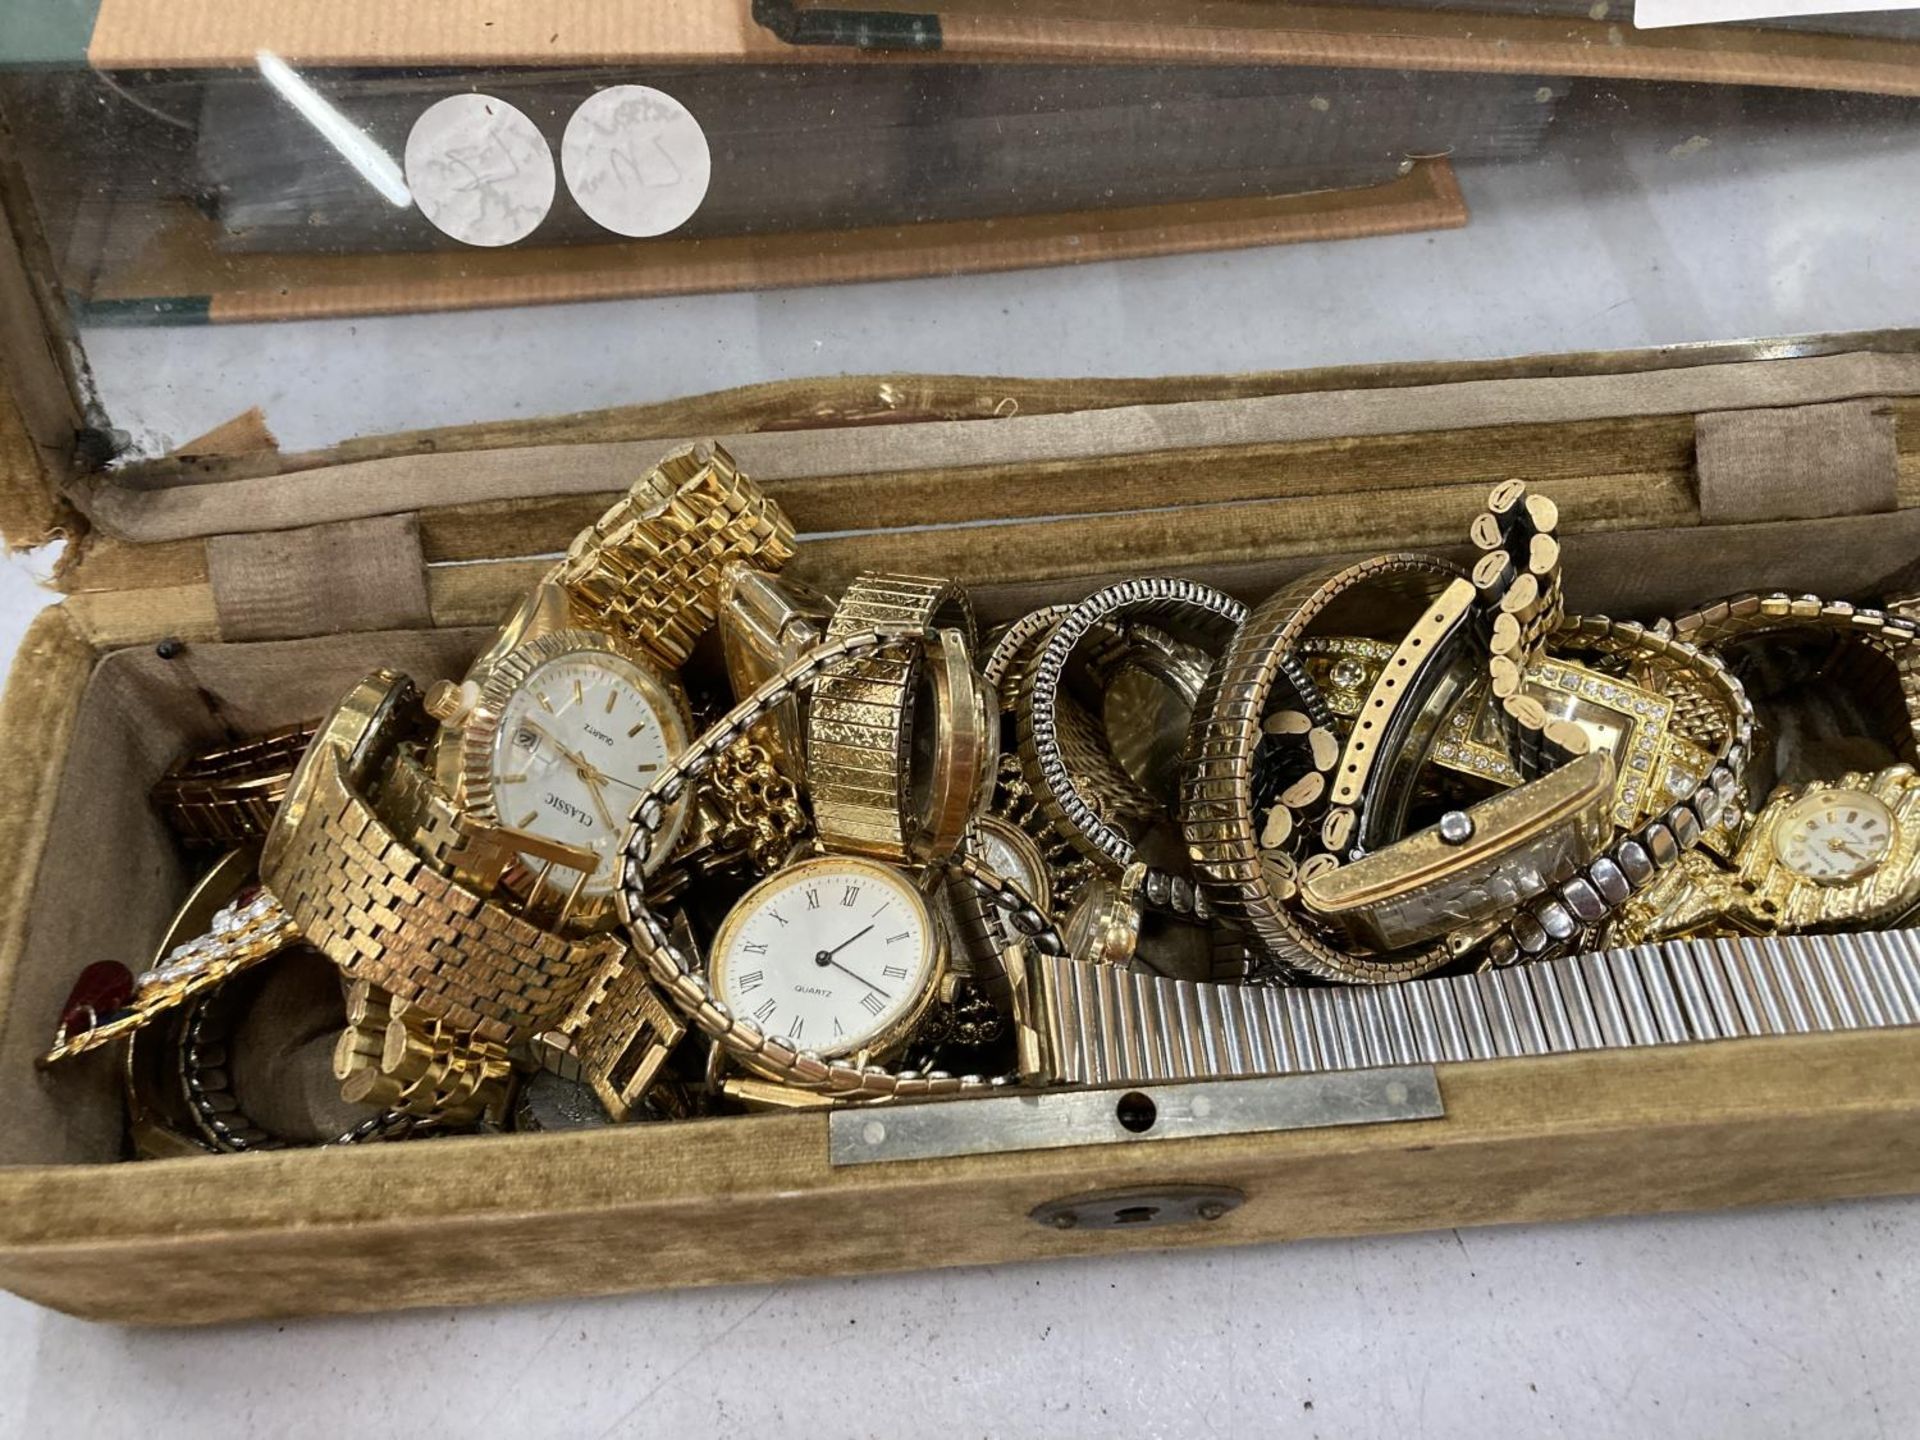 A VICTORIAN DISPLAY BOX CONTAINING A NUMBER OF WRISTWATCHES INCLUDING SEKONDA, TIMEX, TISSOT, ETC - Image 2 of 3